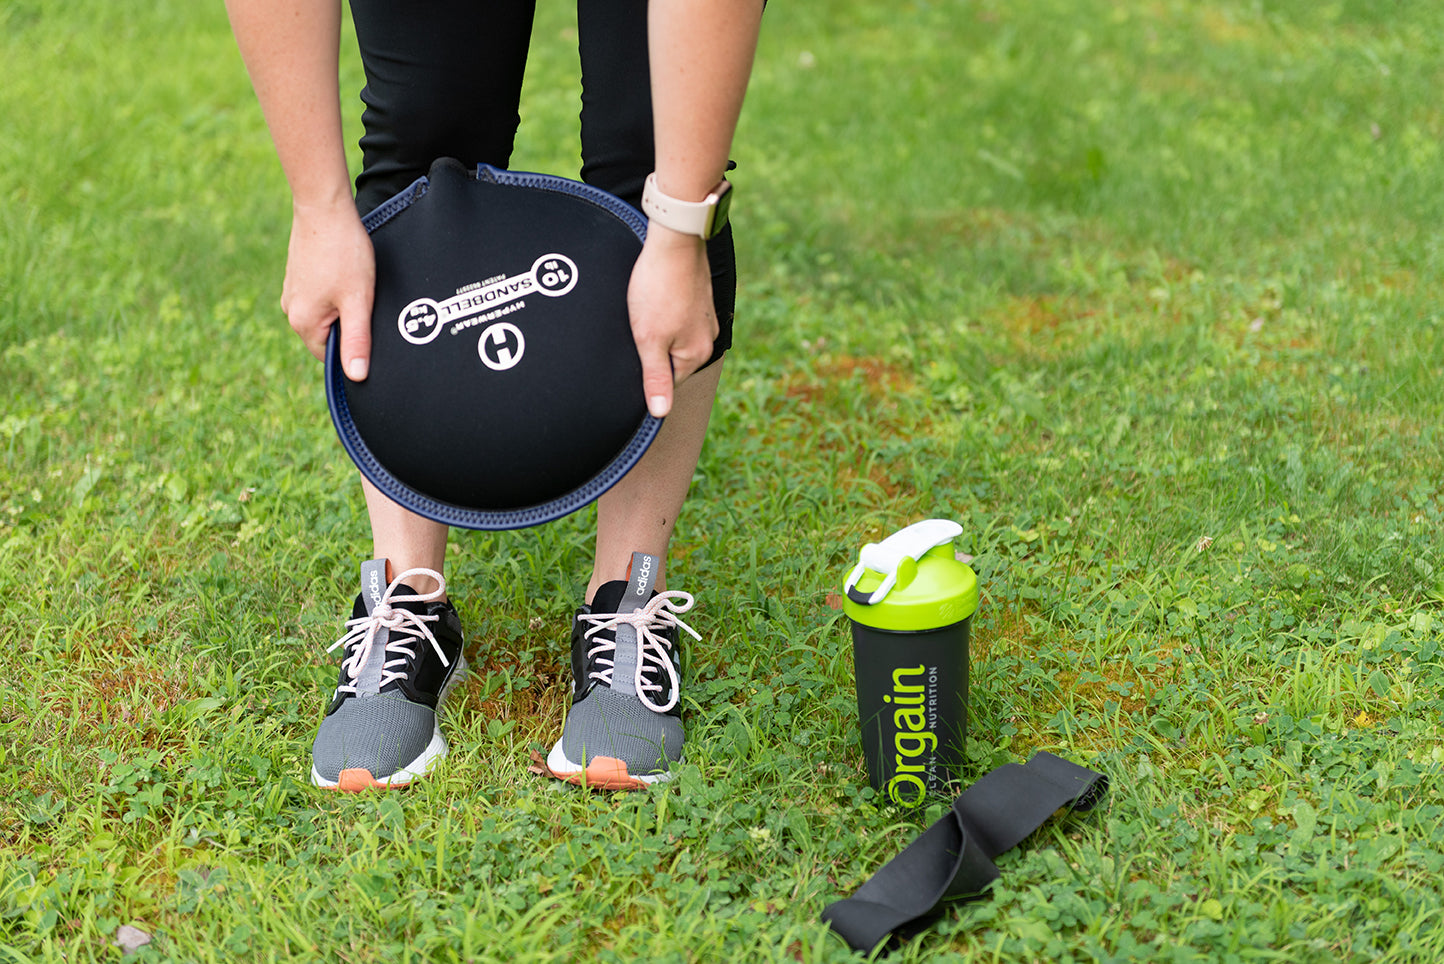 Workout Tools We’re All About Right Now – Orgain